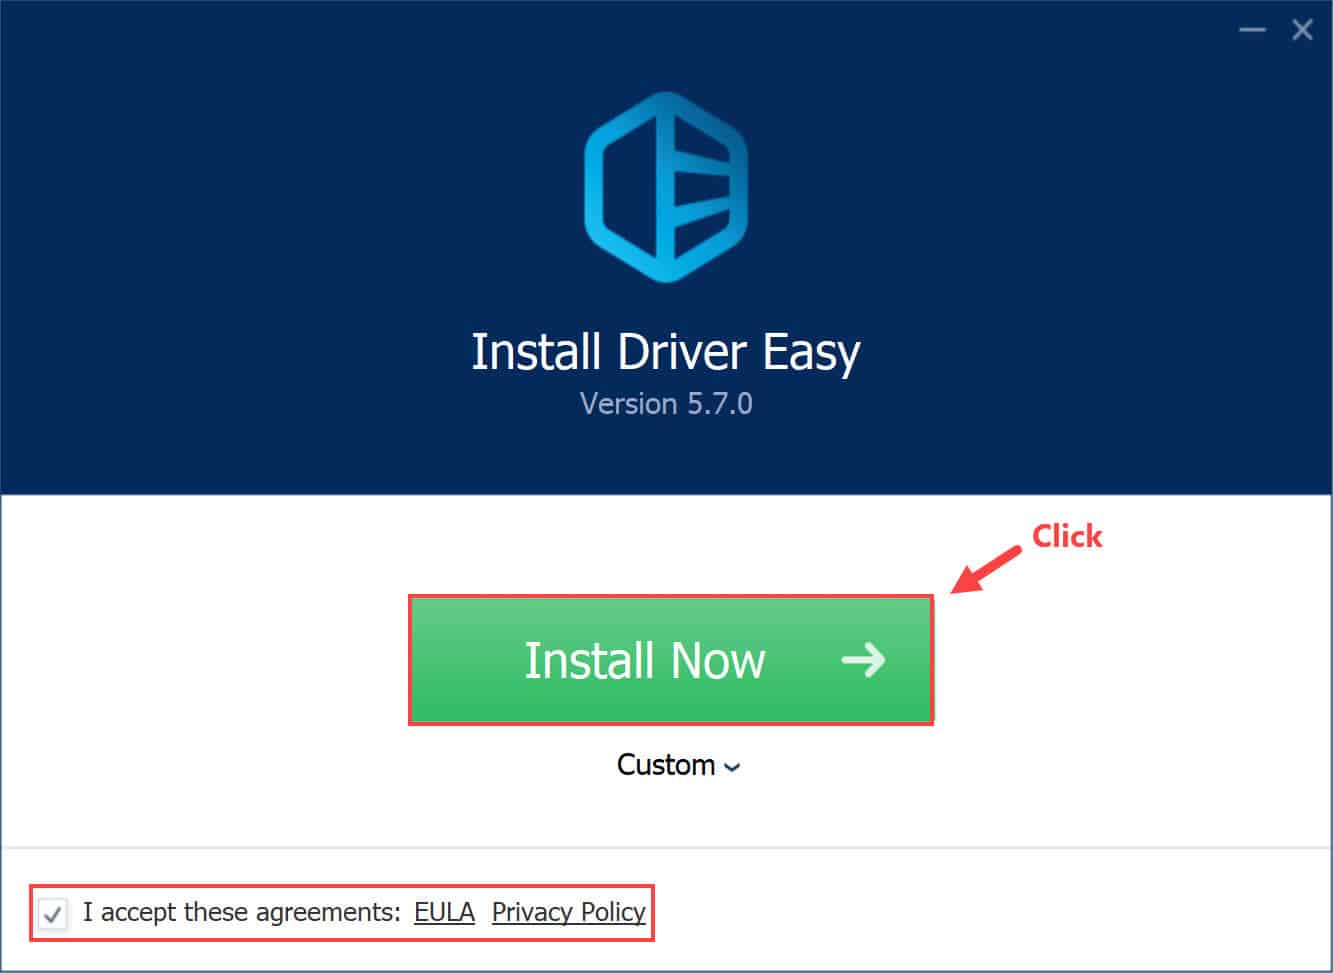 Download and install Driver Easy